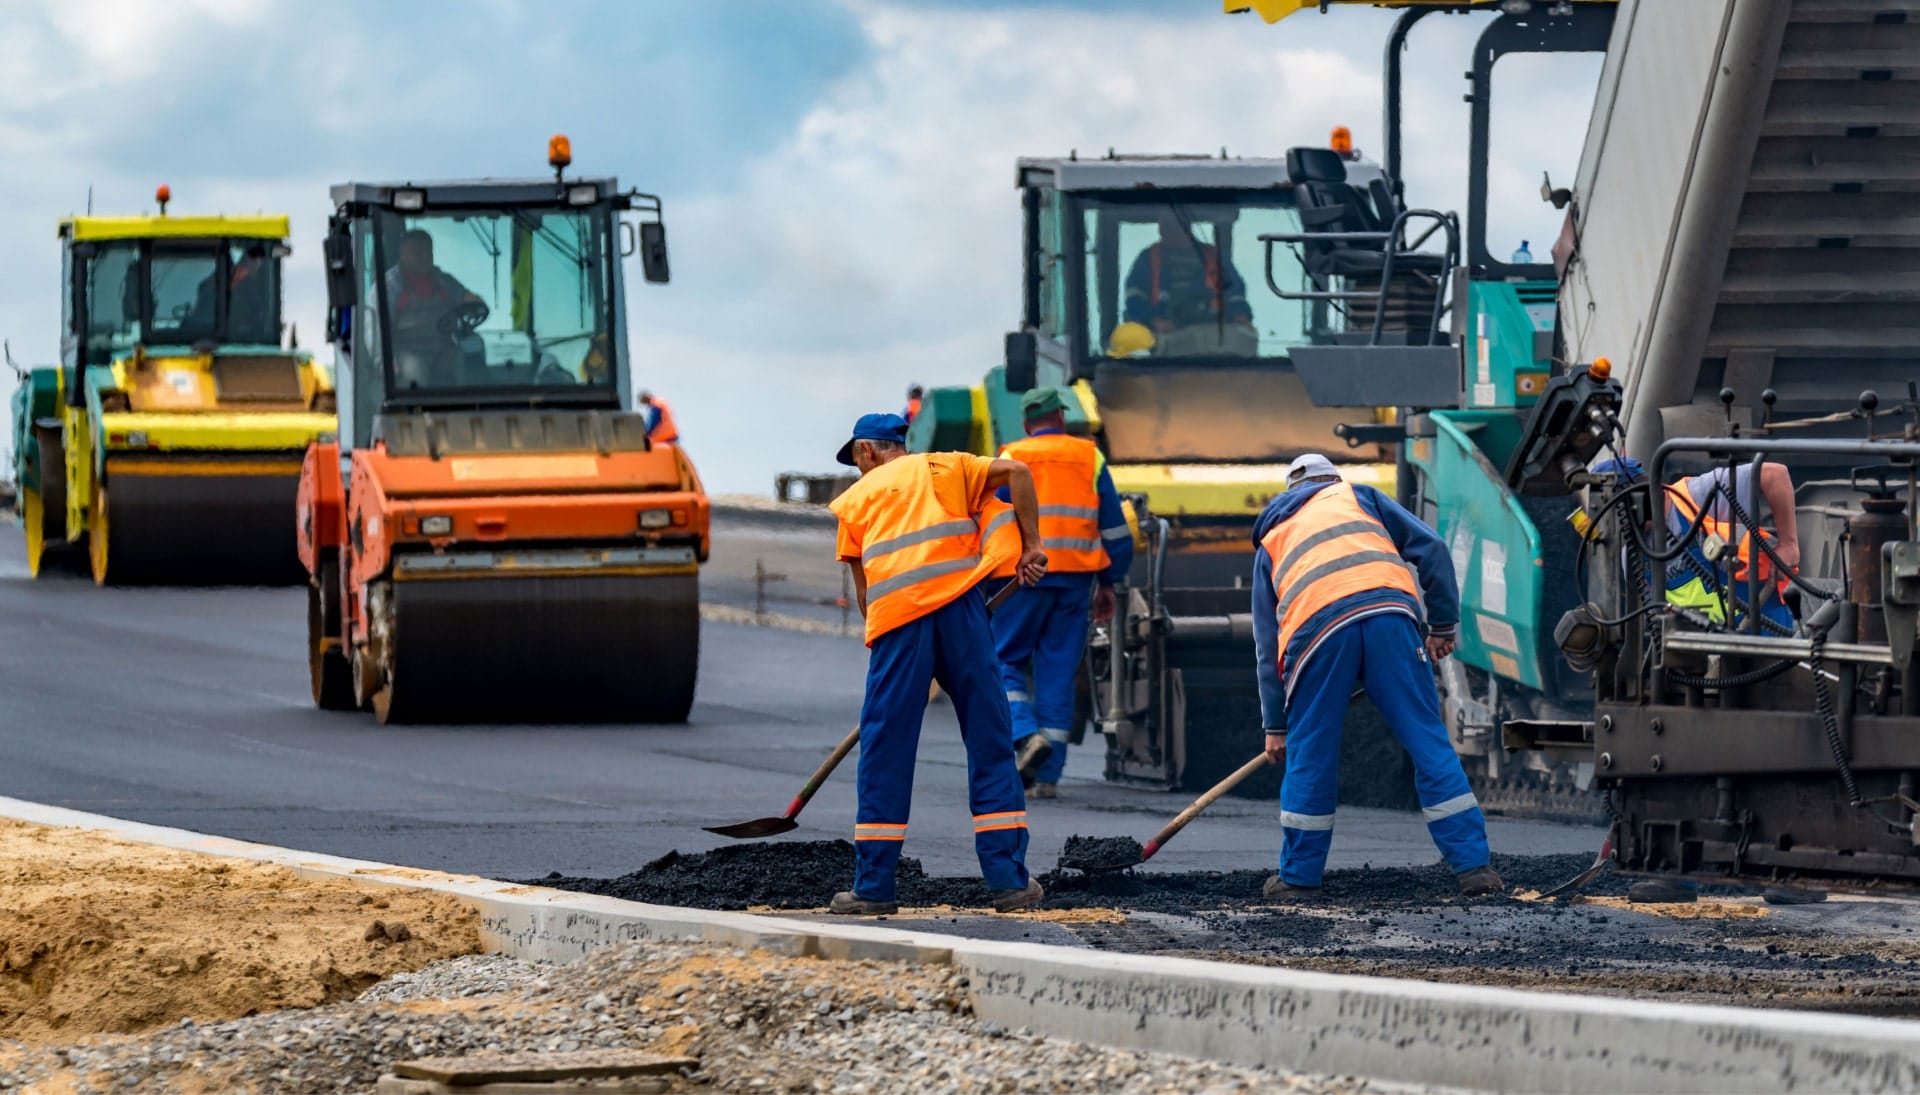 Reliable asphalt construction services in Wichita, KS for various projects.